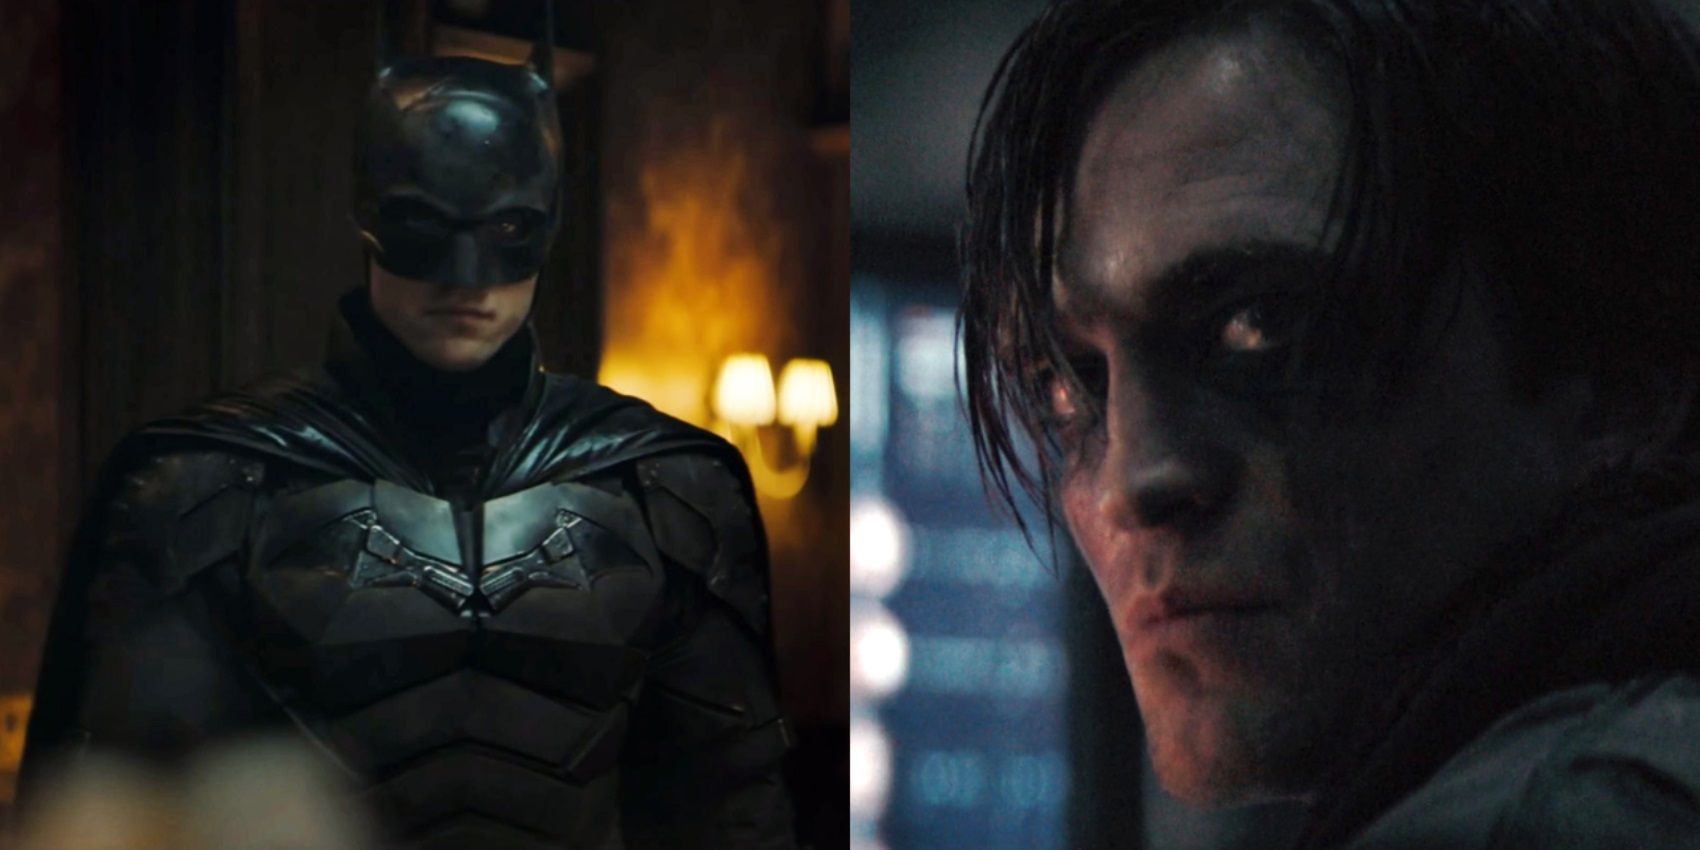 Split image of Robert Pattinson in the Batsuit at a crime scene and in the Batcave in The Batman